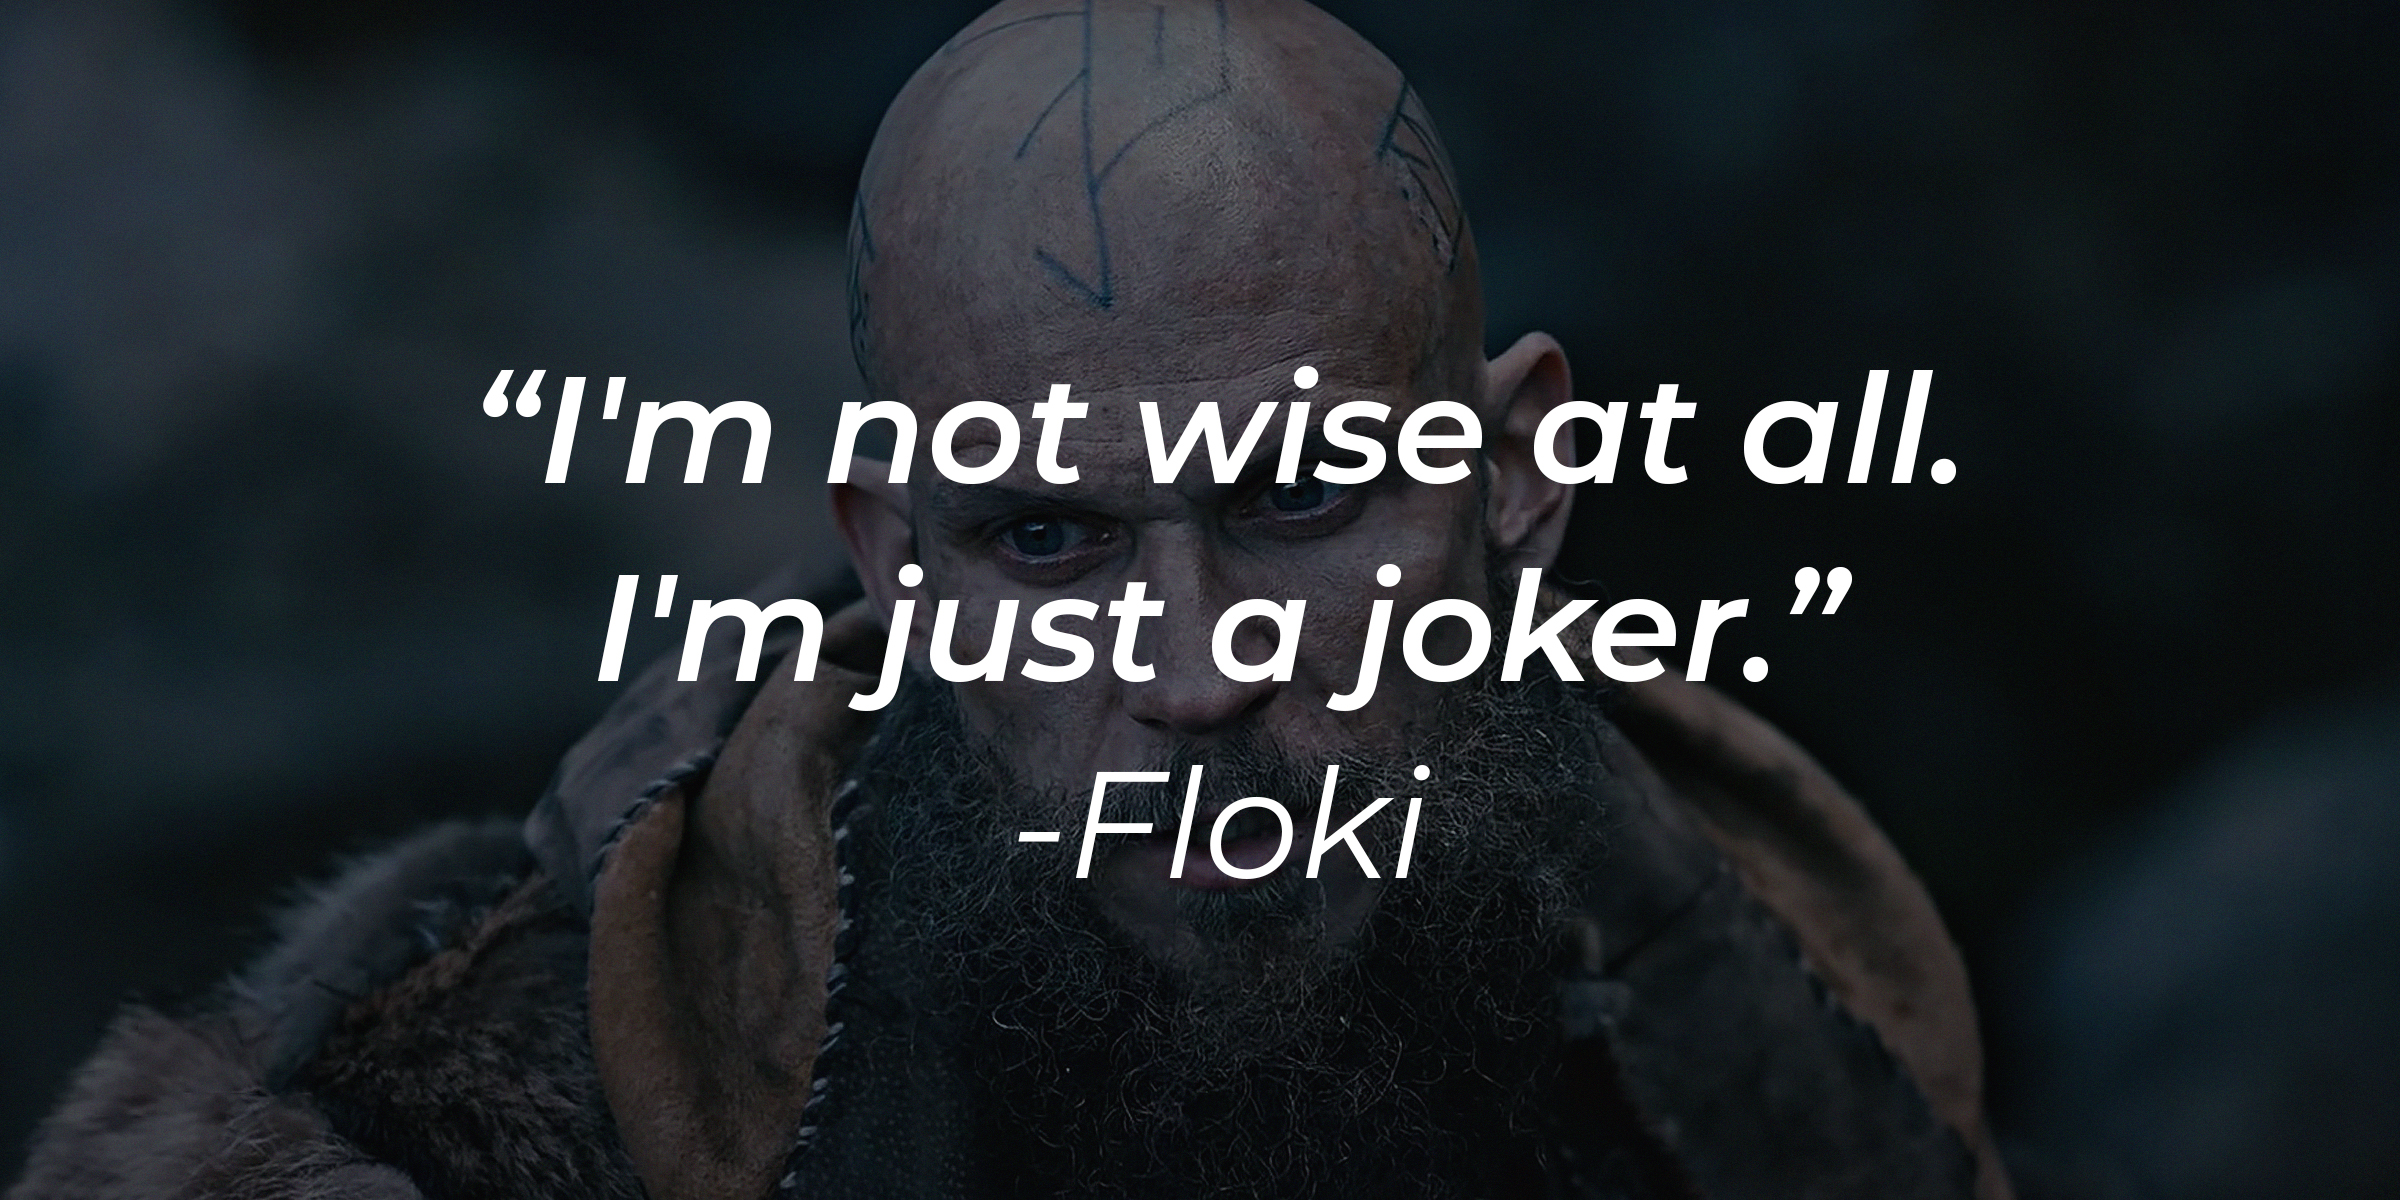 An image of Floki with his quote: “I'm not wise at all. I'm just a joker.” | Source: facebook.com/Vikings